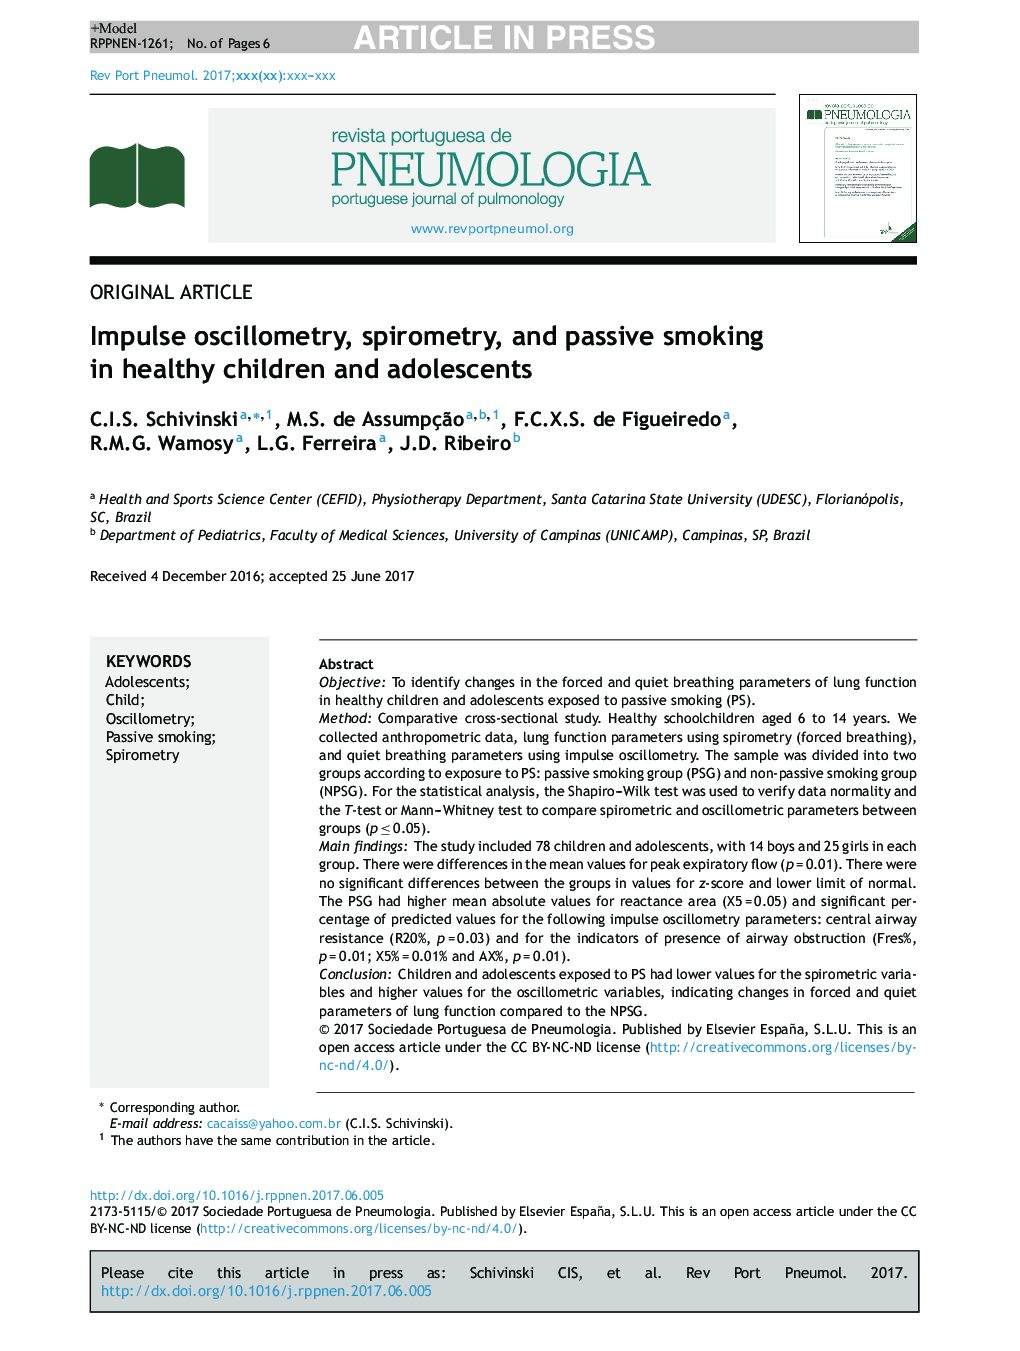 Impulse oscillometry, spirometry, and passive smoking in healthy children and adolescents